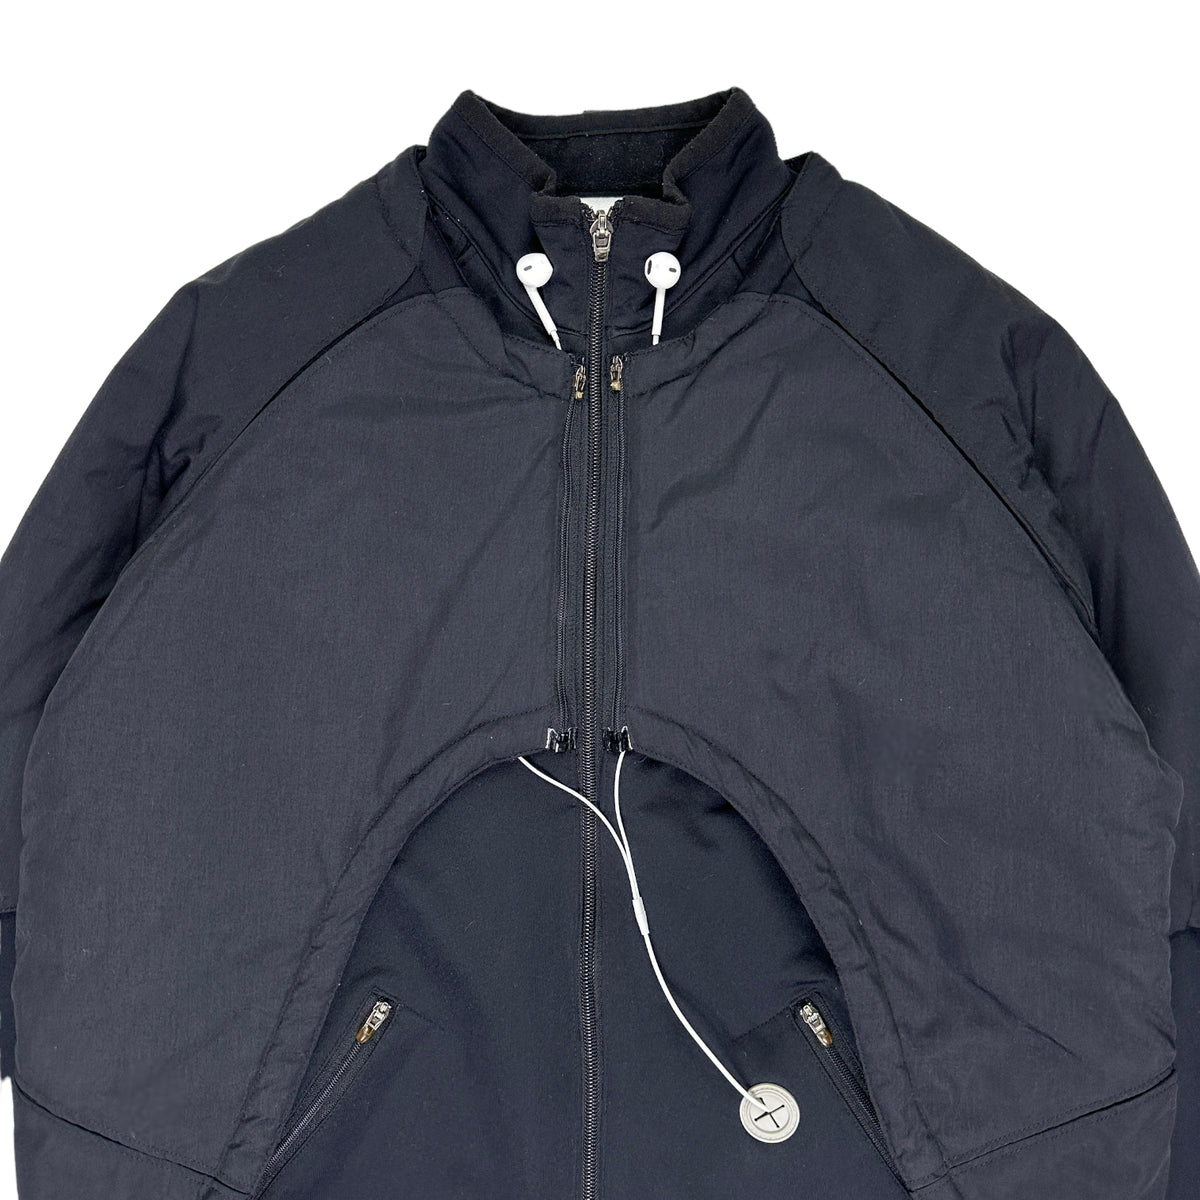 Nike Mobius MP3 2in1 Windrunner Jacket SS03' - Small / Medium ...